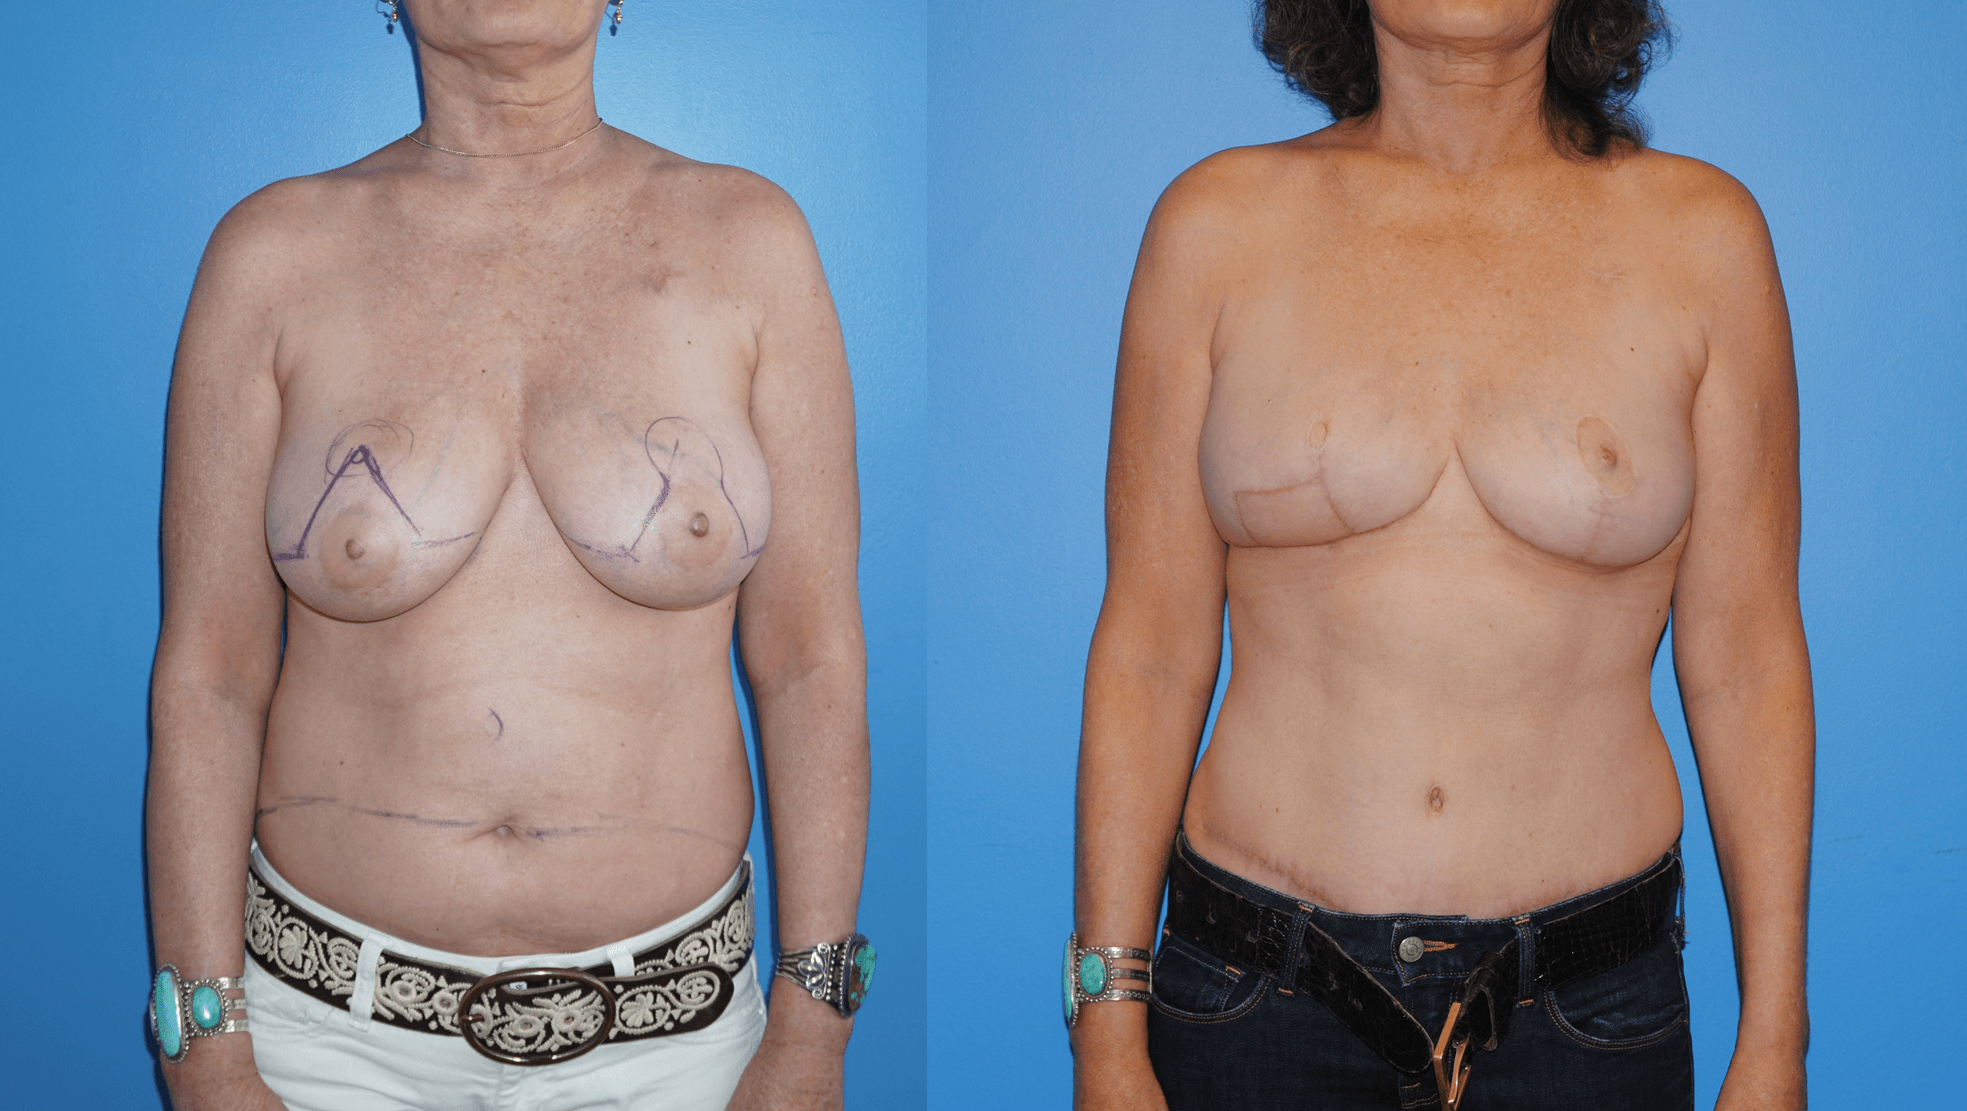 Displays Unilateral Breast DIEP Flap reconstruction and contralateral mastopexy